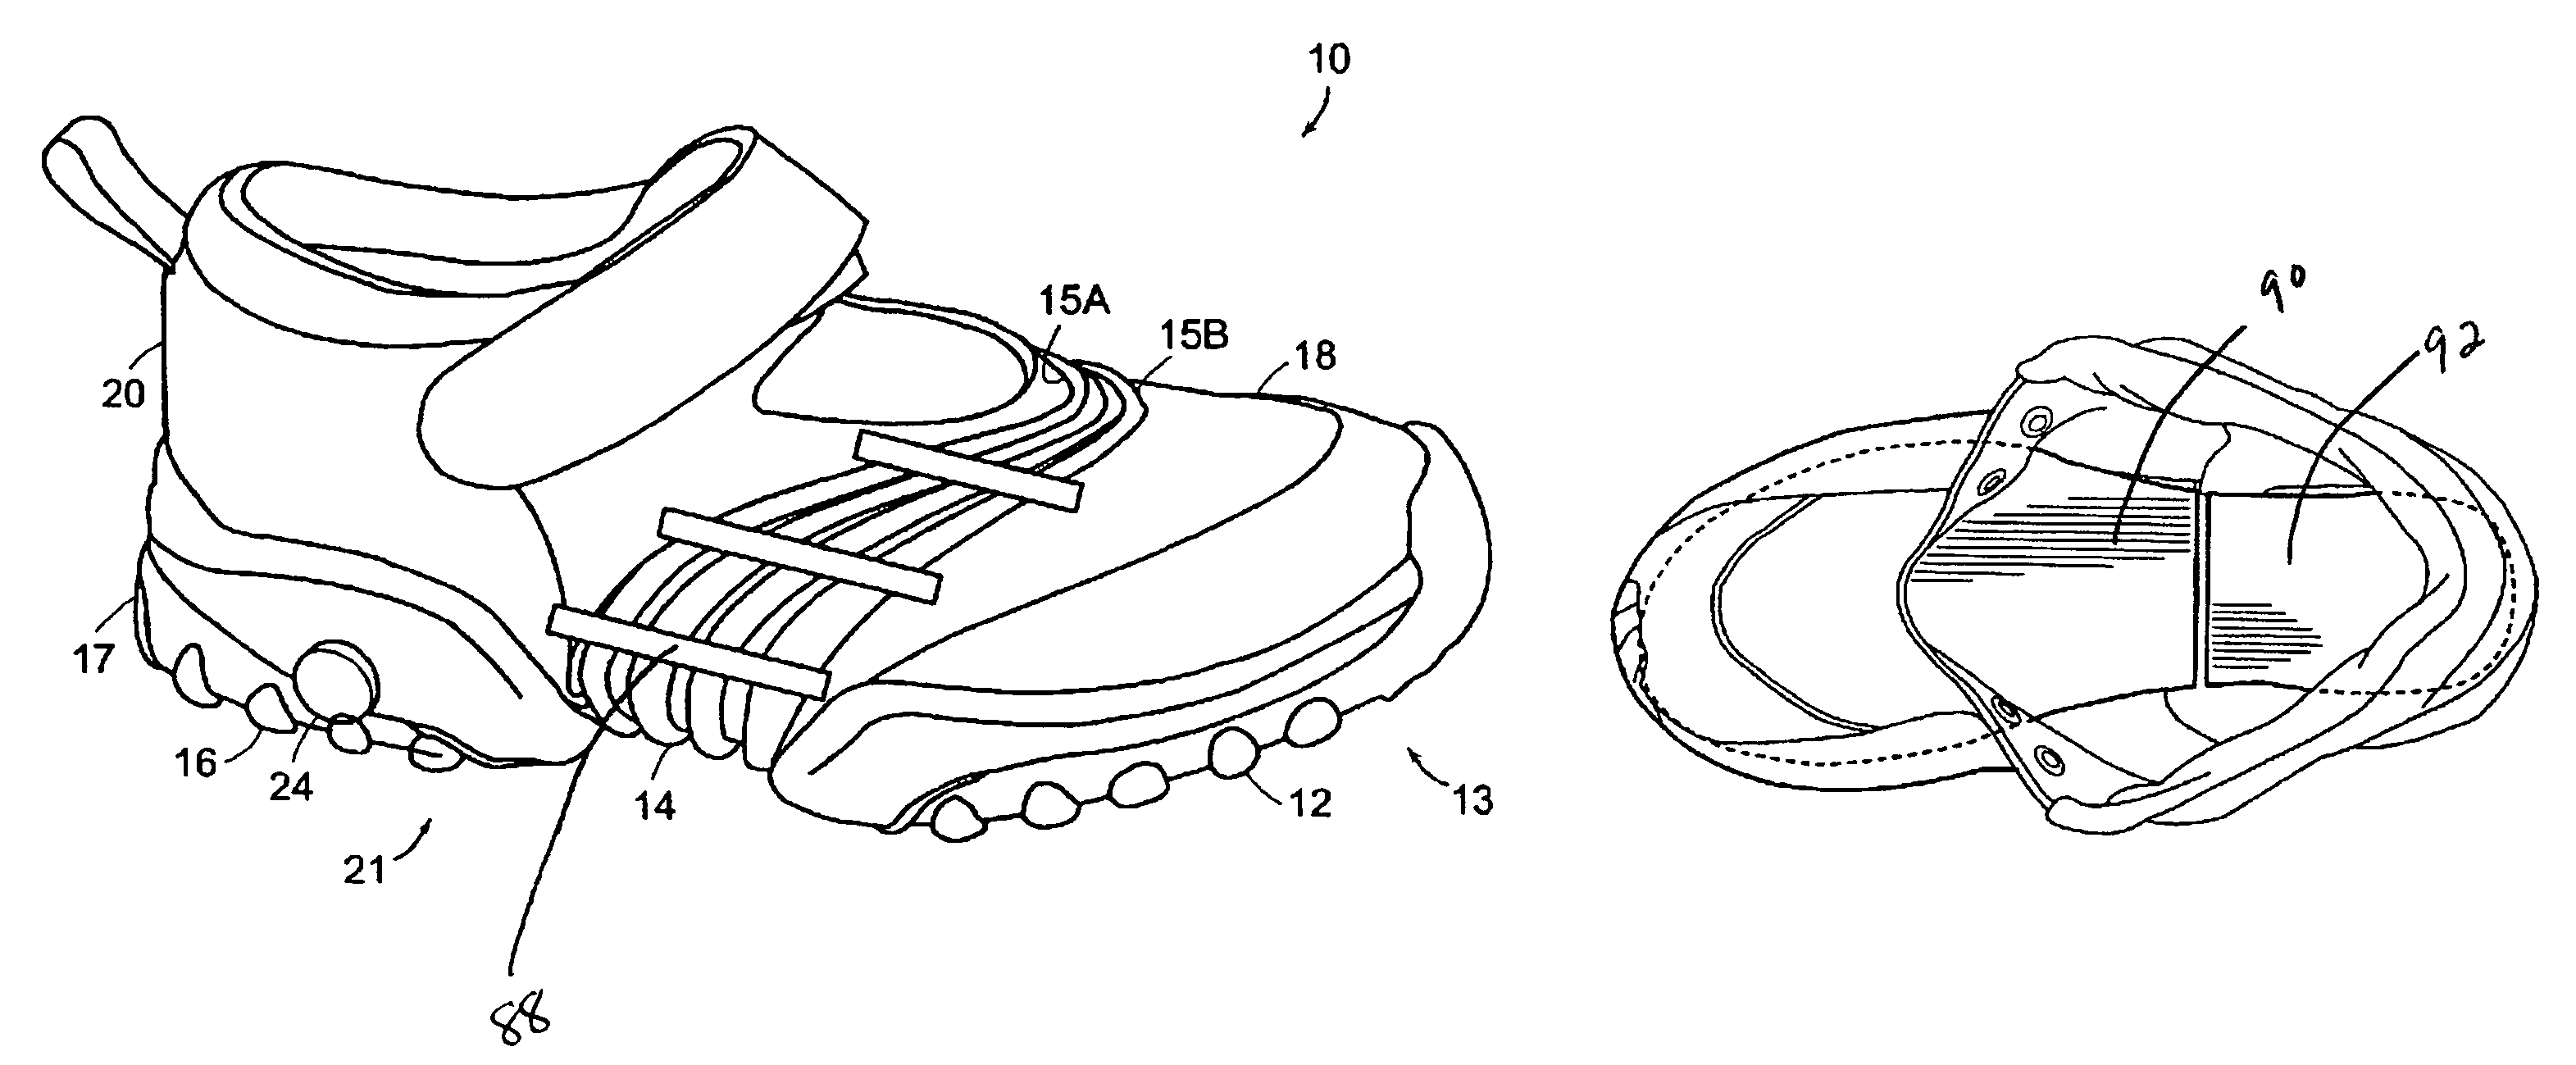 Method of making an expandable shoe